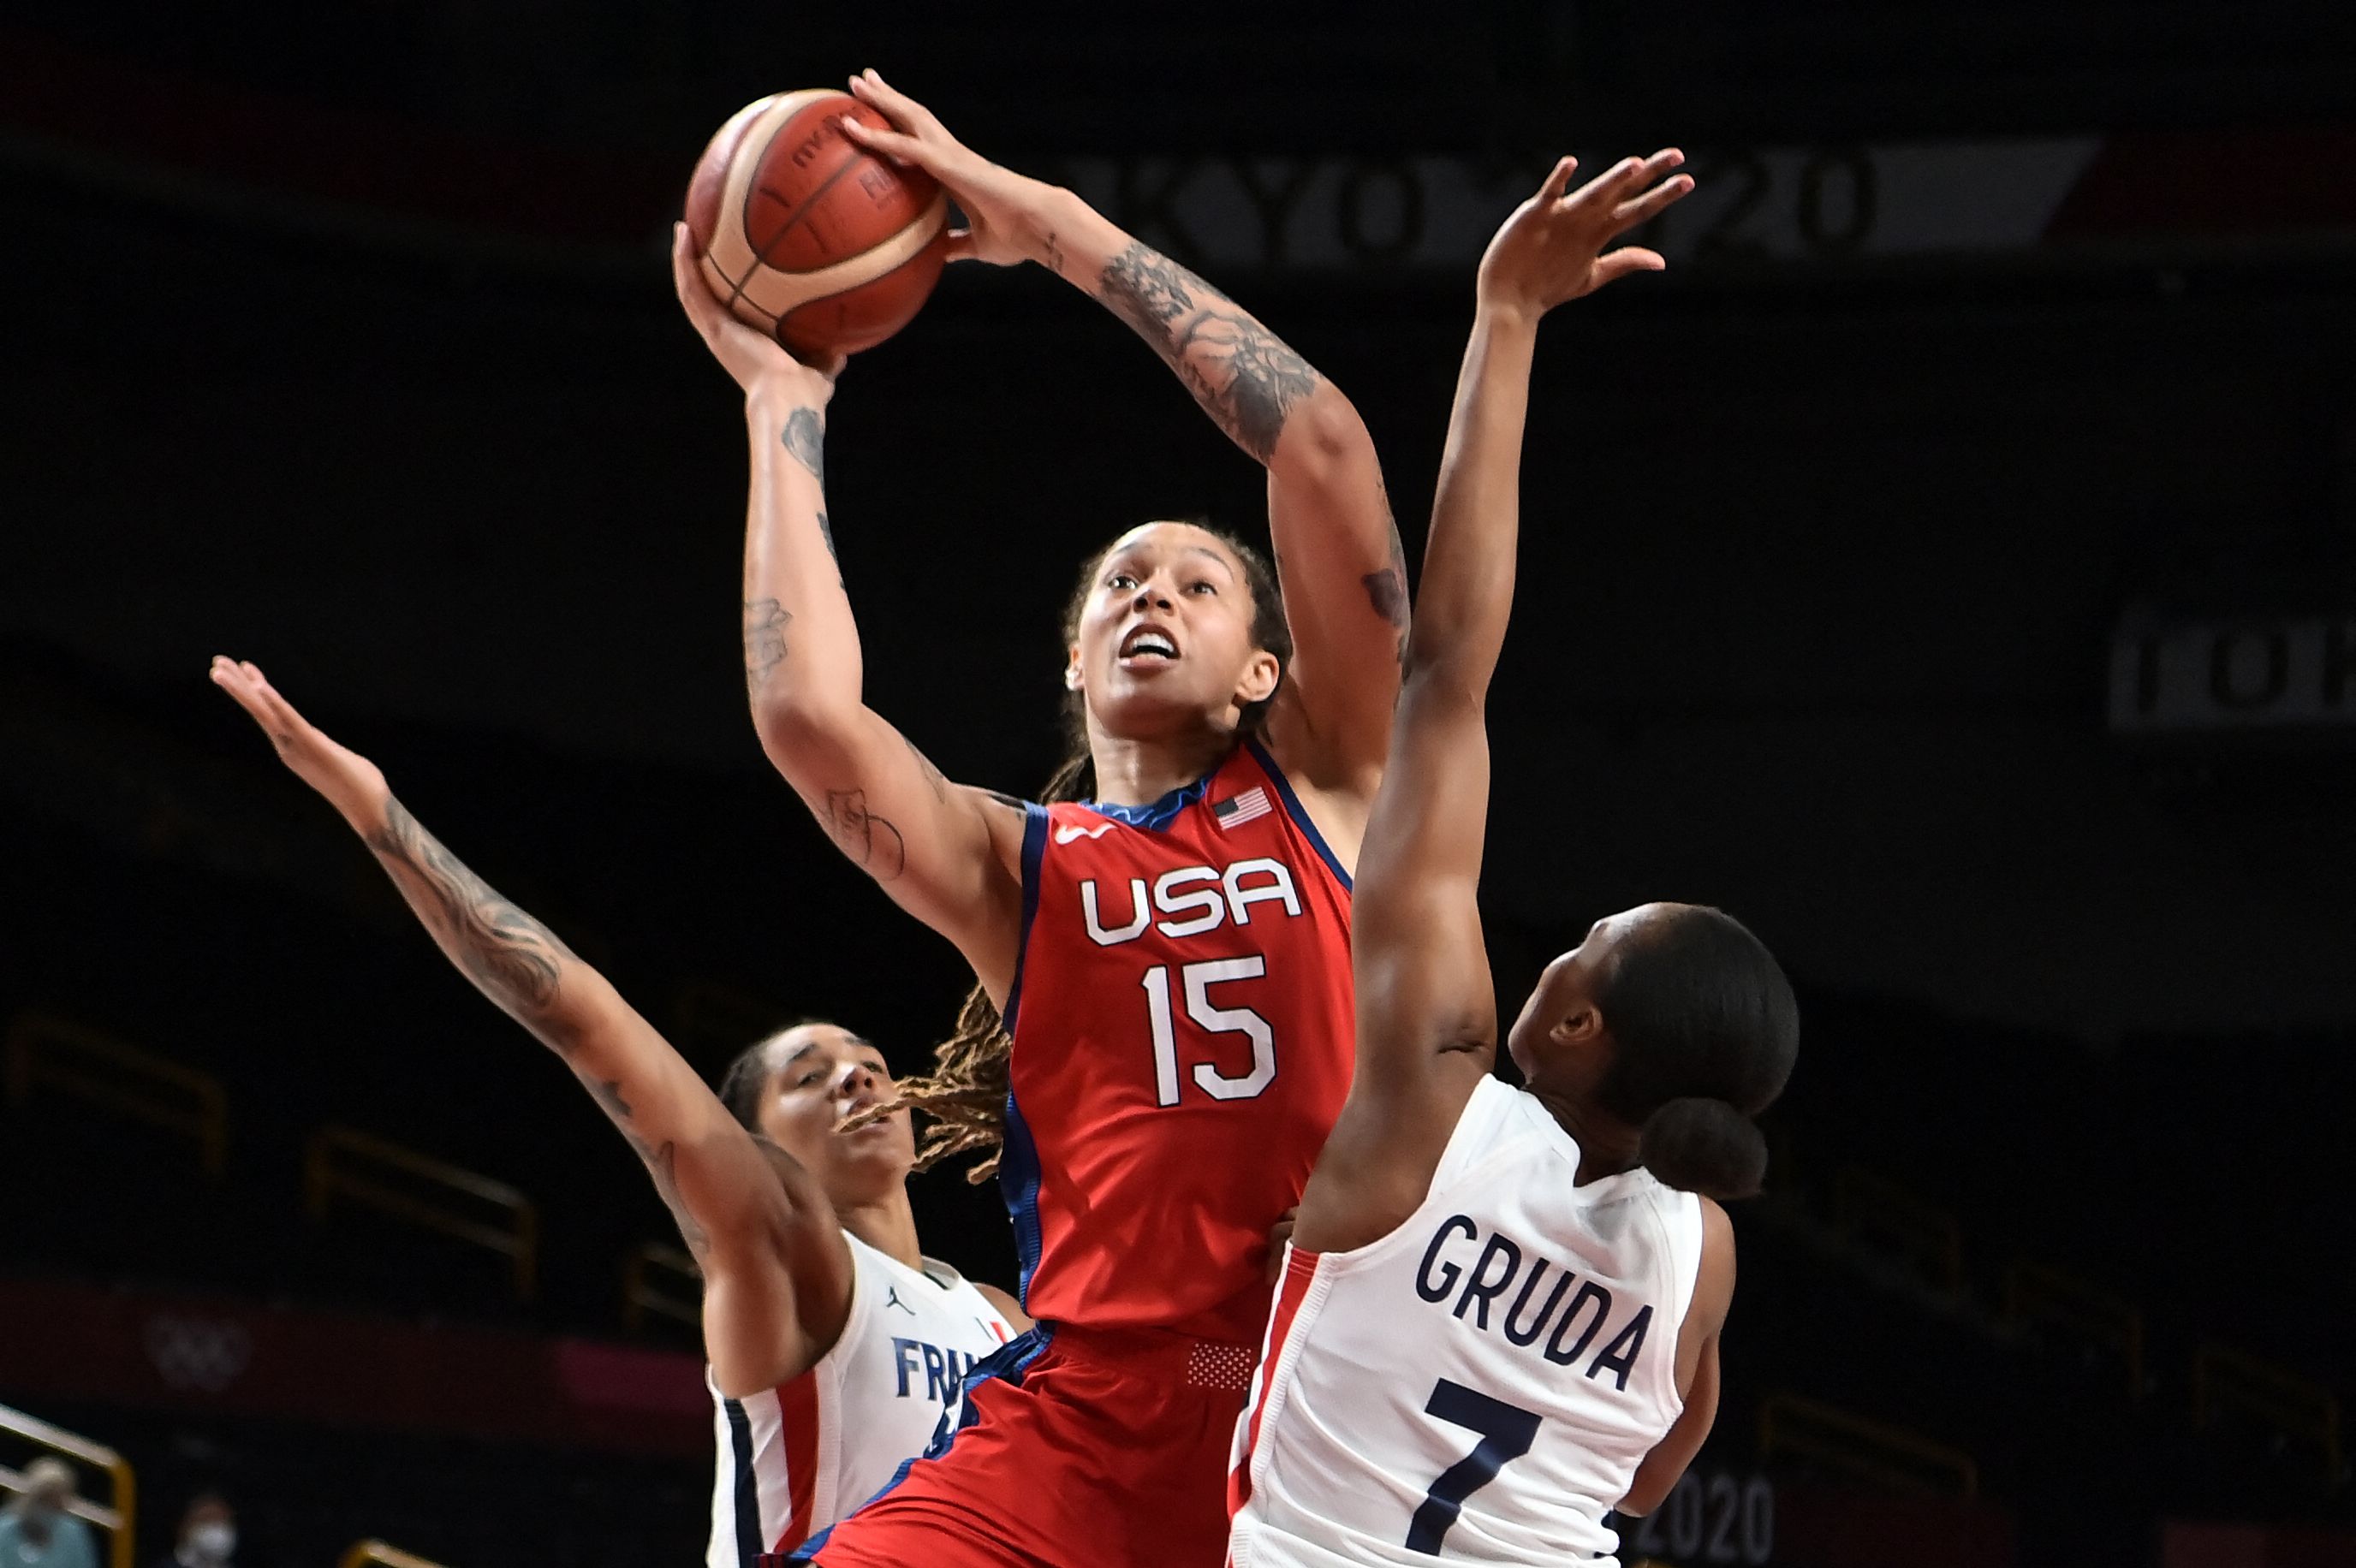 USA's Brittney Griner (C) goes to the basket past France's Sandrine Gruda (R) in the women's preliminary round group B basketball match between France and USA